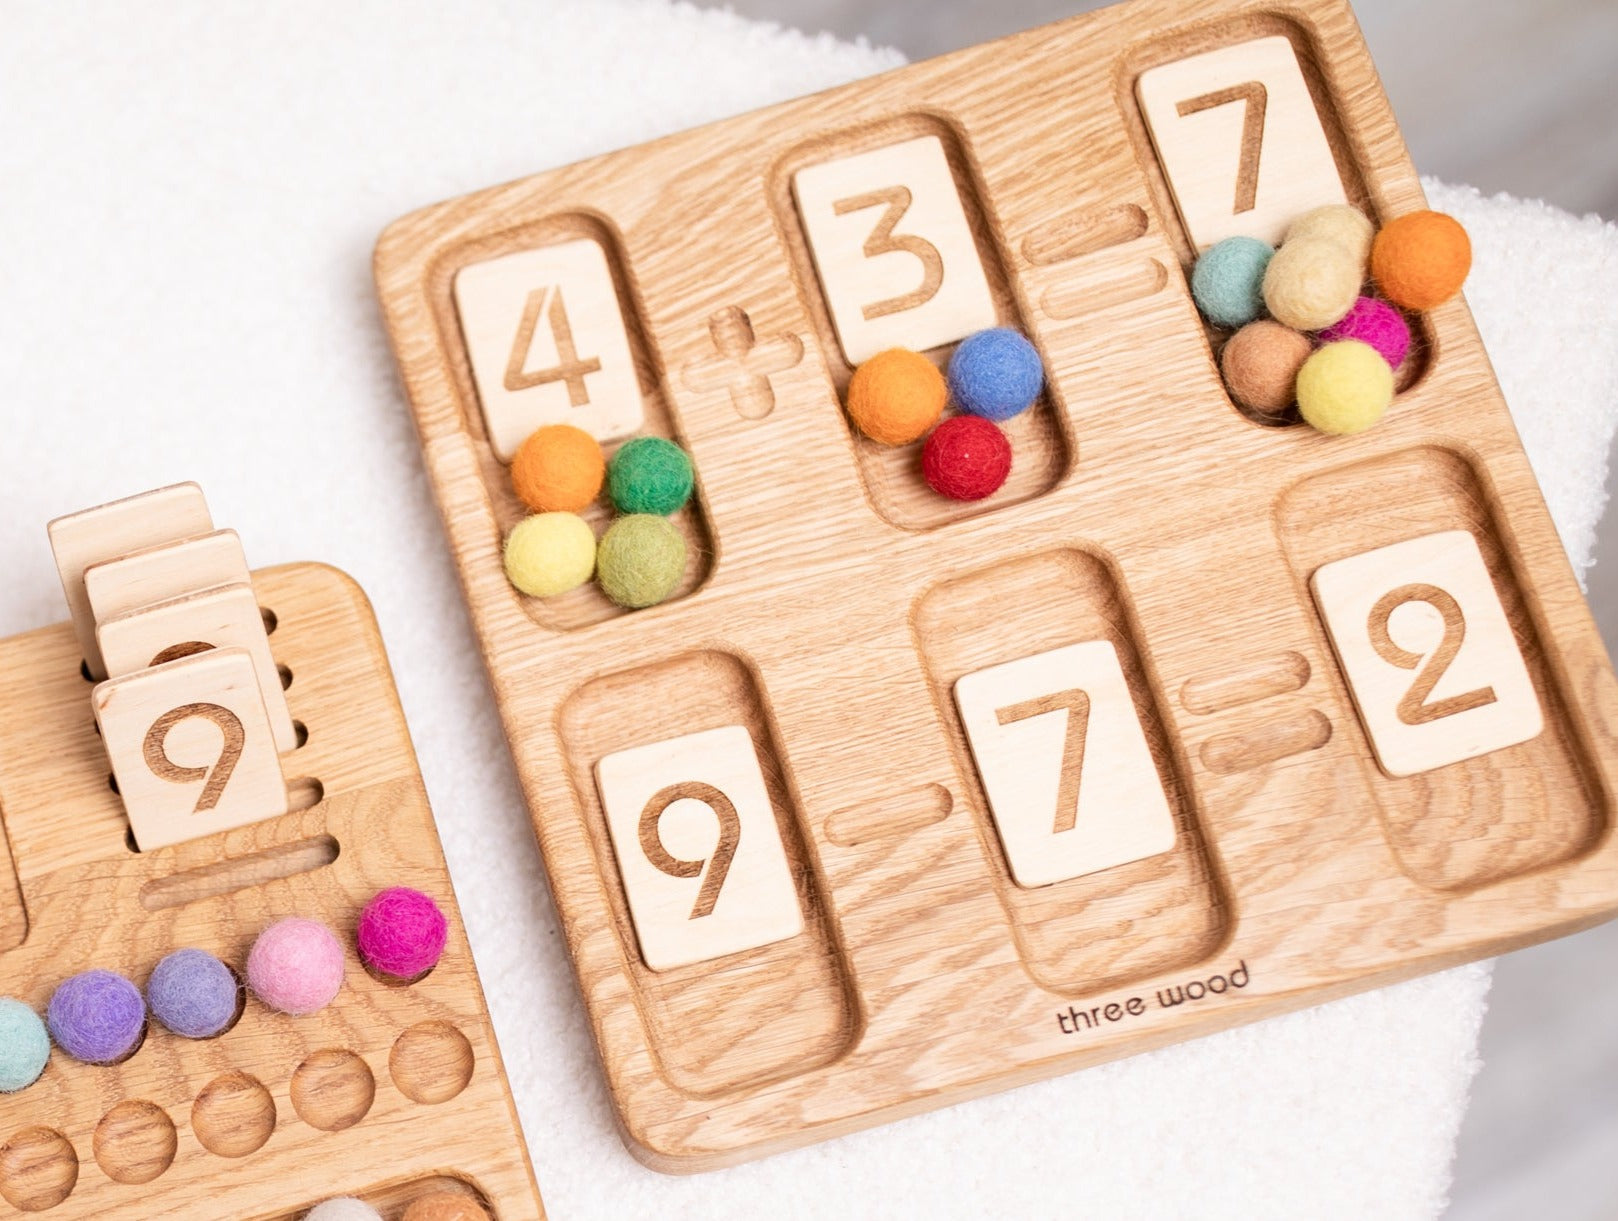 Montessori Math reversible board with number cards 1-20, preschool homeschool learning resource educational material